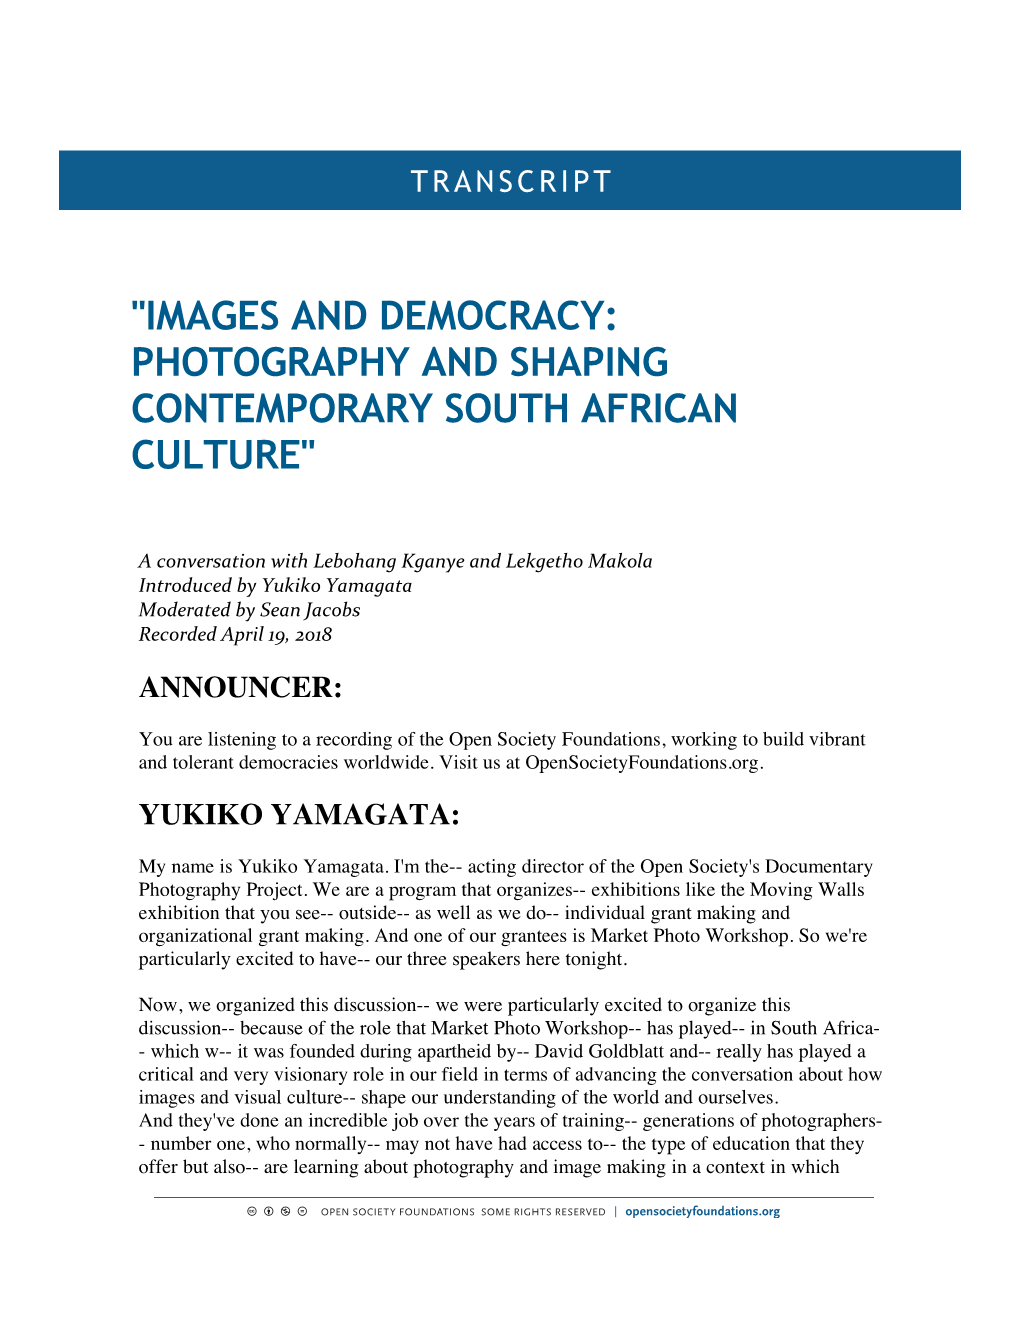 Images and Democracy: Photography and Shaping Contemporary South African Culture"